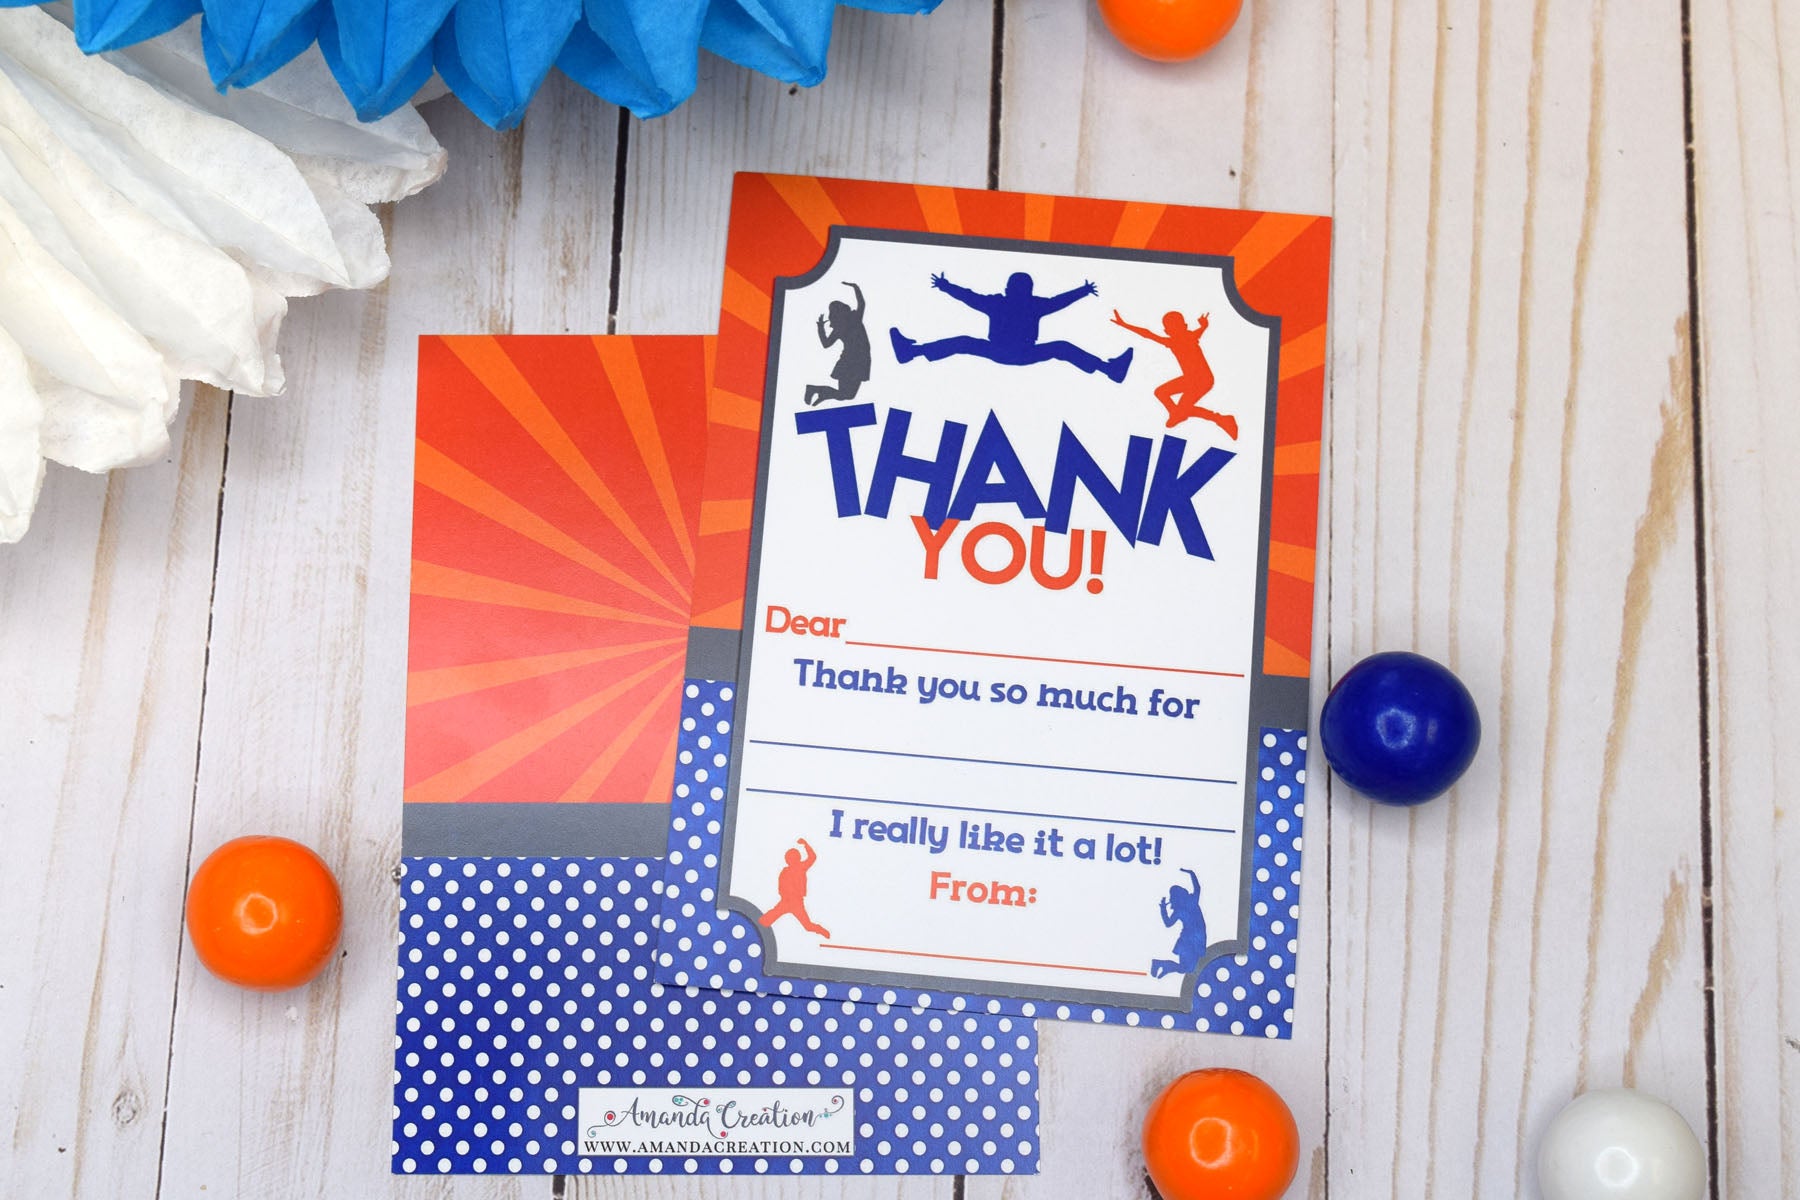 Thank You! - Jumping Jack's Fun Zone